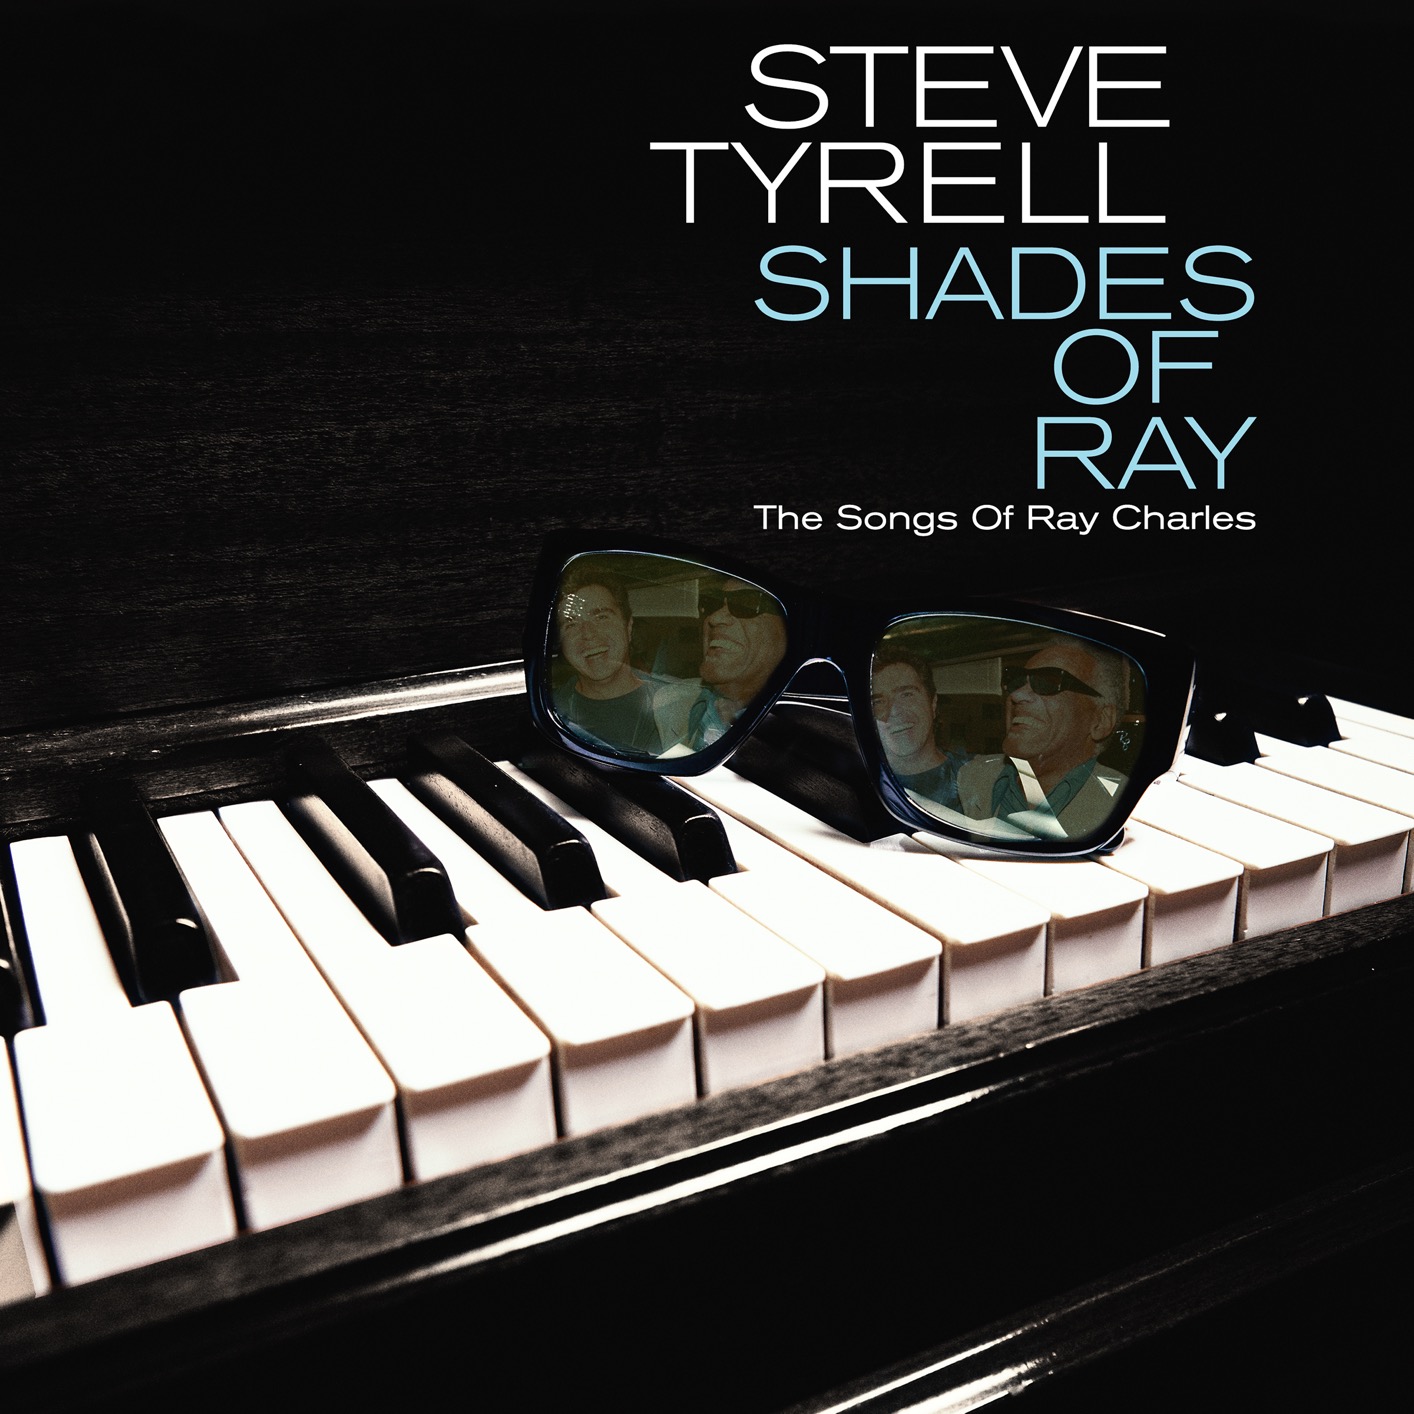 Steve Tyrell - Shades of Ray: The Songs of Ray Charles (2021) [FLAC 24bit/44,1kHz]